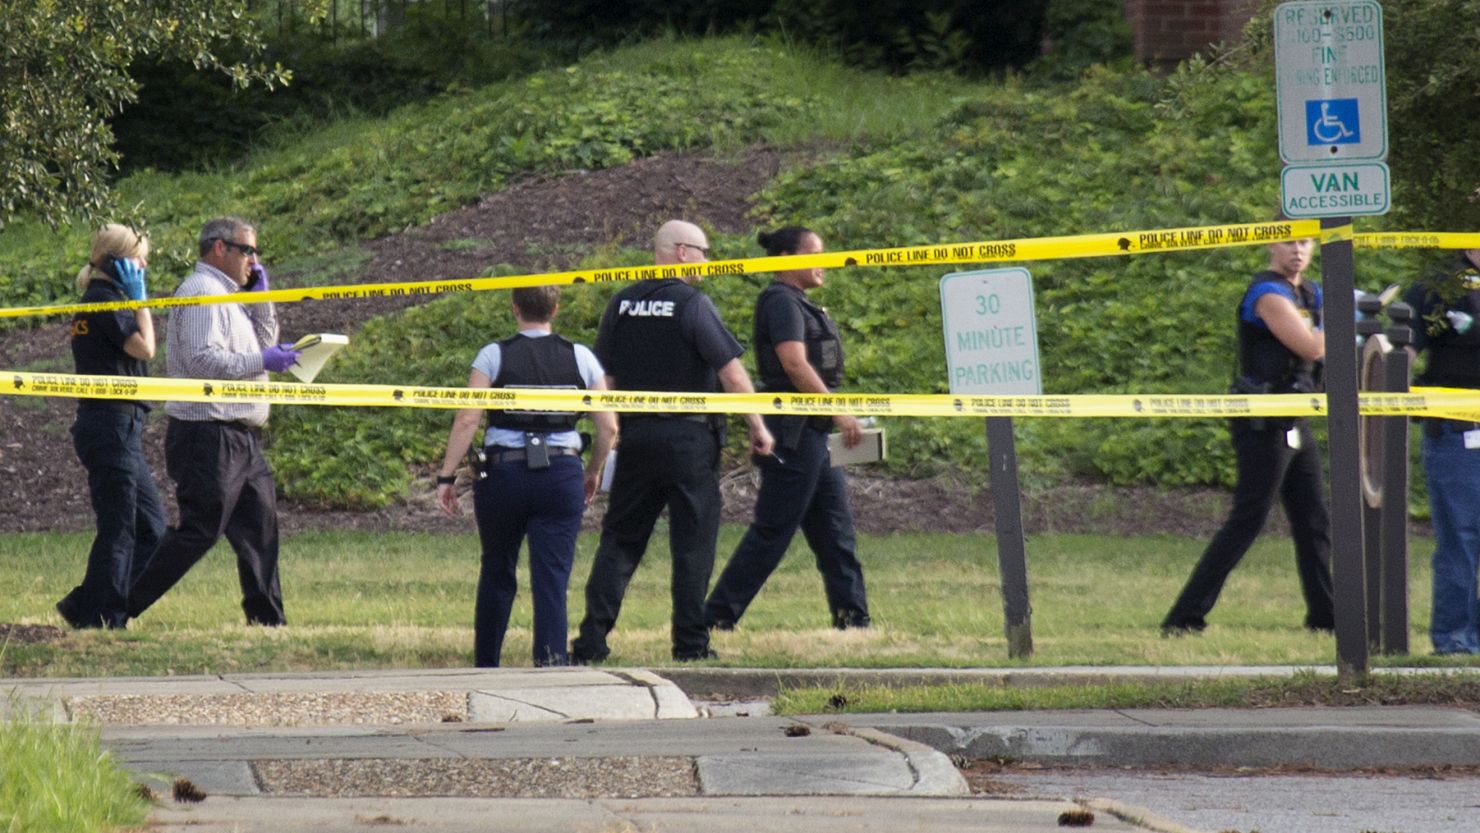 Police work the scene where 12 people were killed during a mass shooting at the Virginia Beach city public works building, on Friday, May 31.